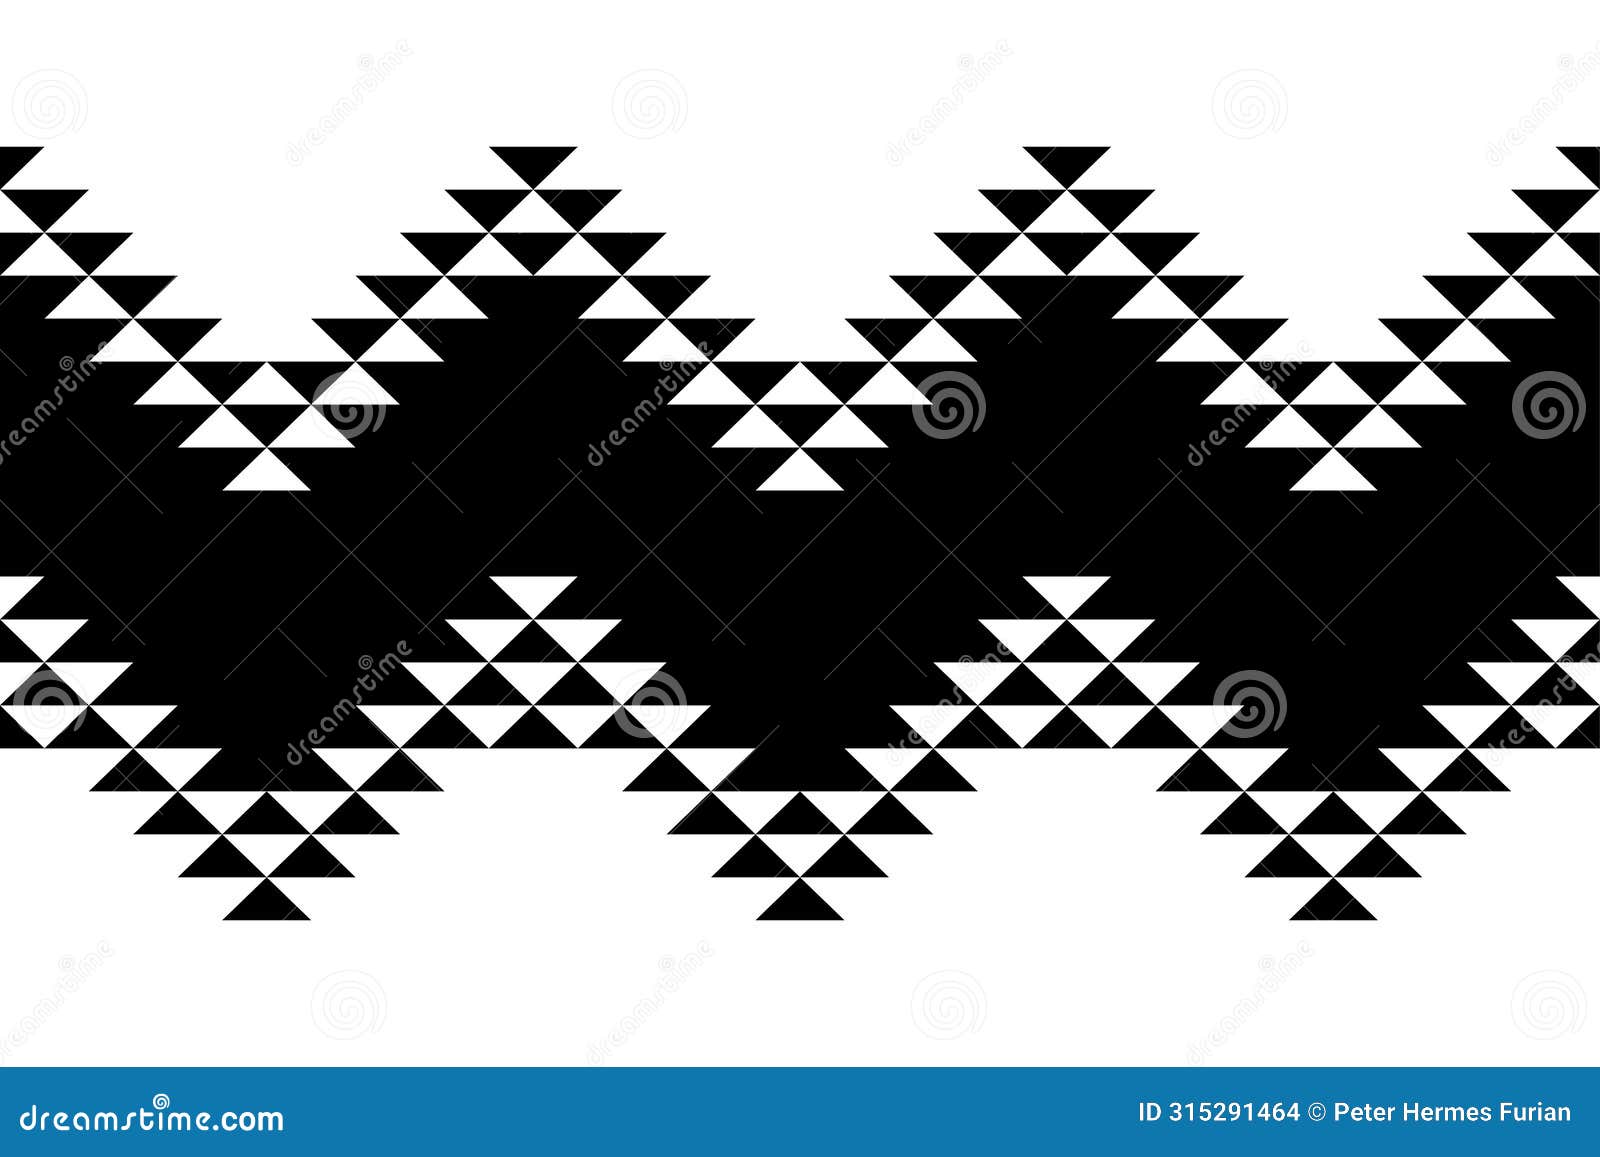 anasazi pattern, seamless tile, based on the artful repetition of triangles